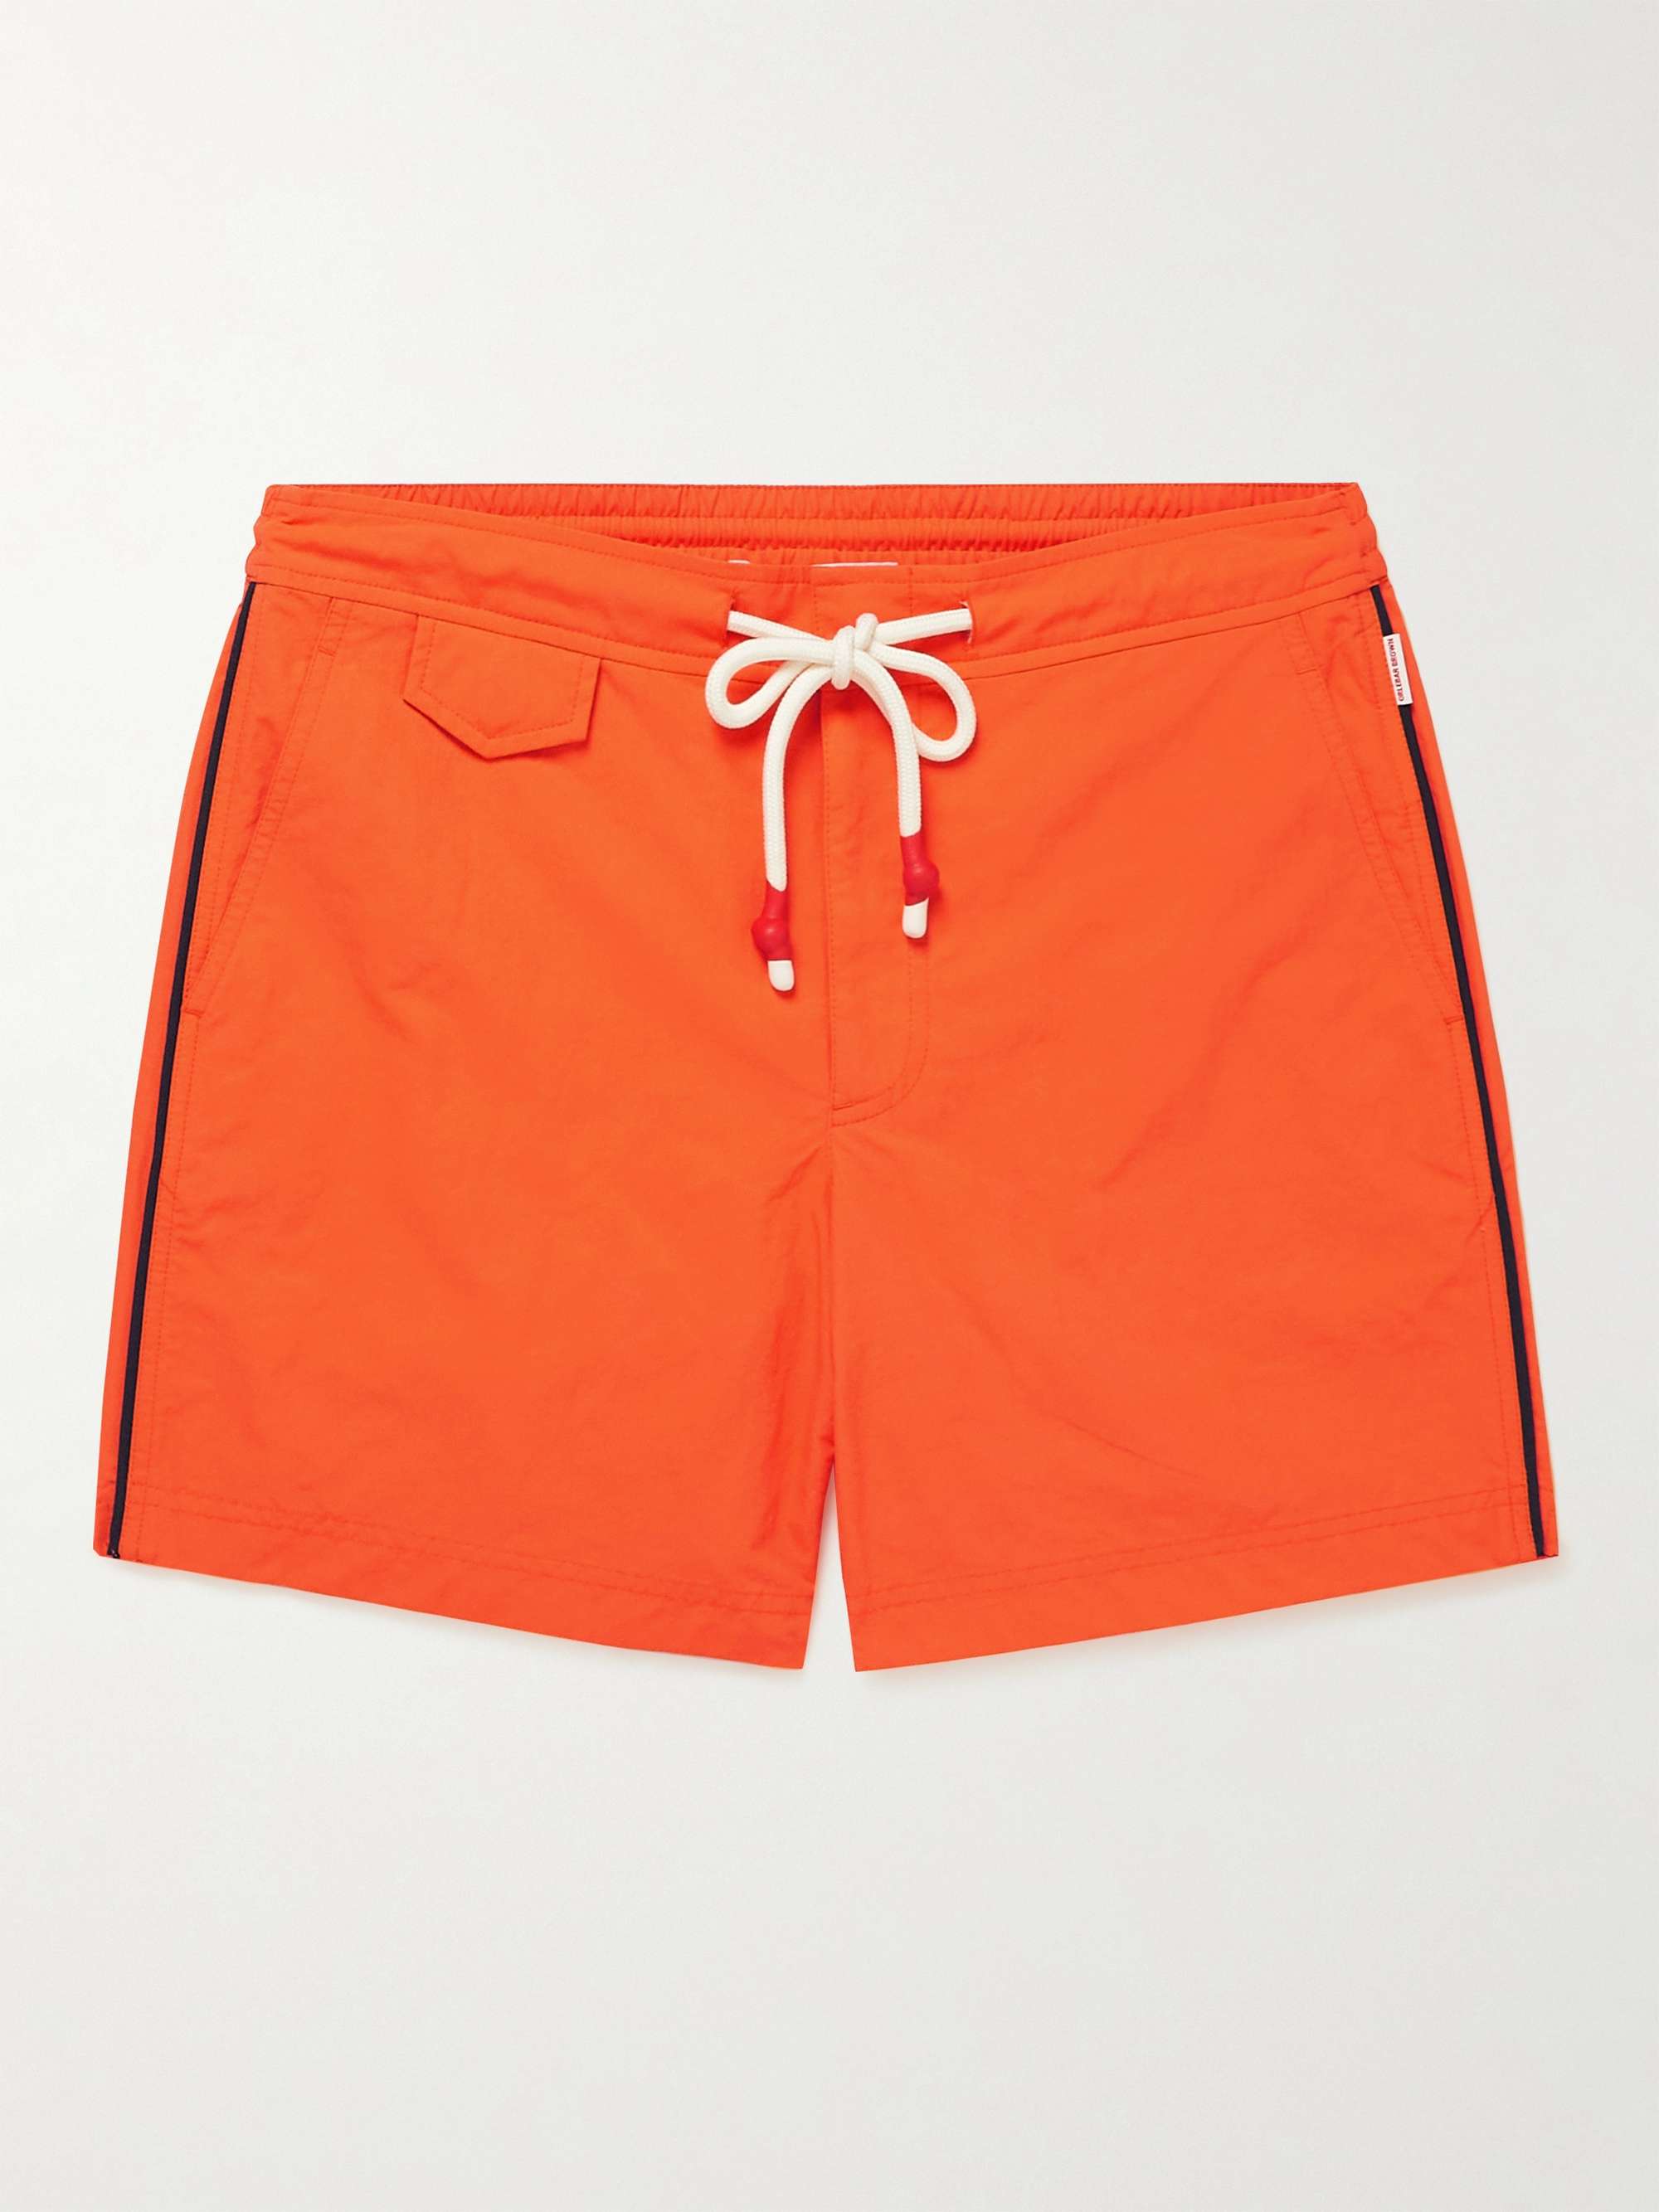 ORLEBAR BROWN Standard Mid-Length Piped Swim Shorts